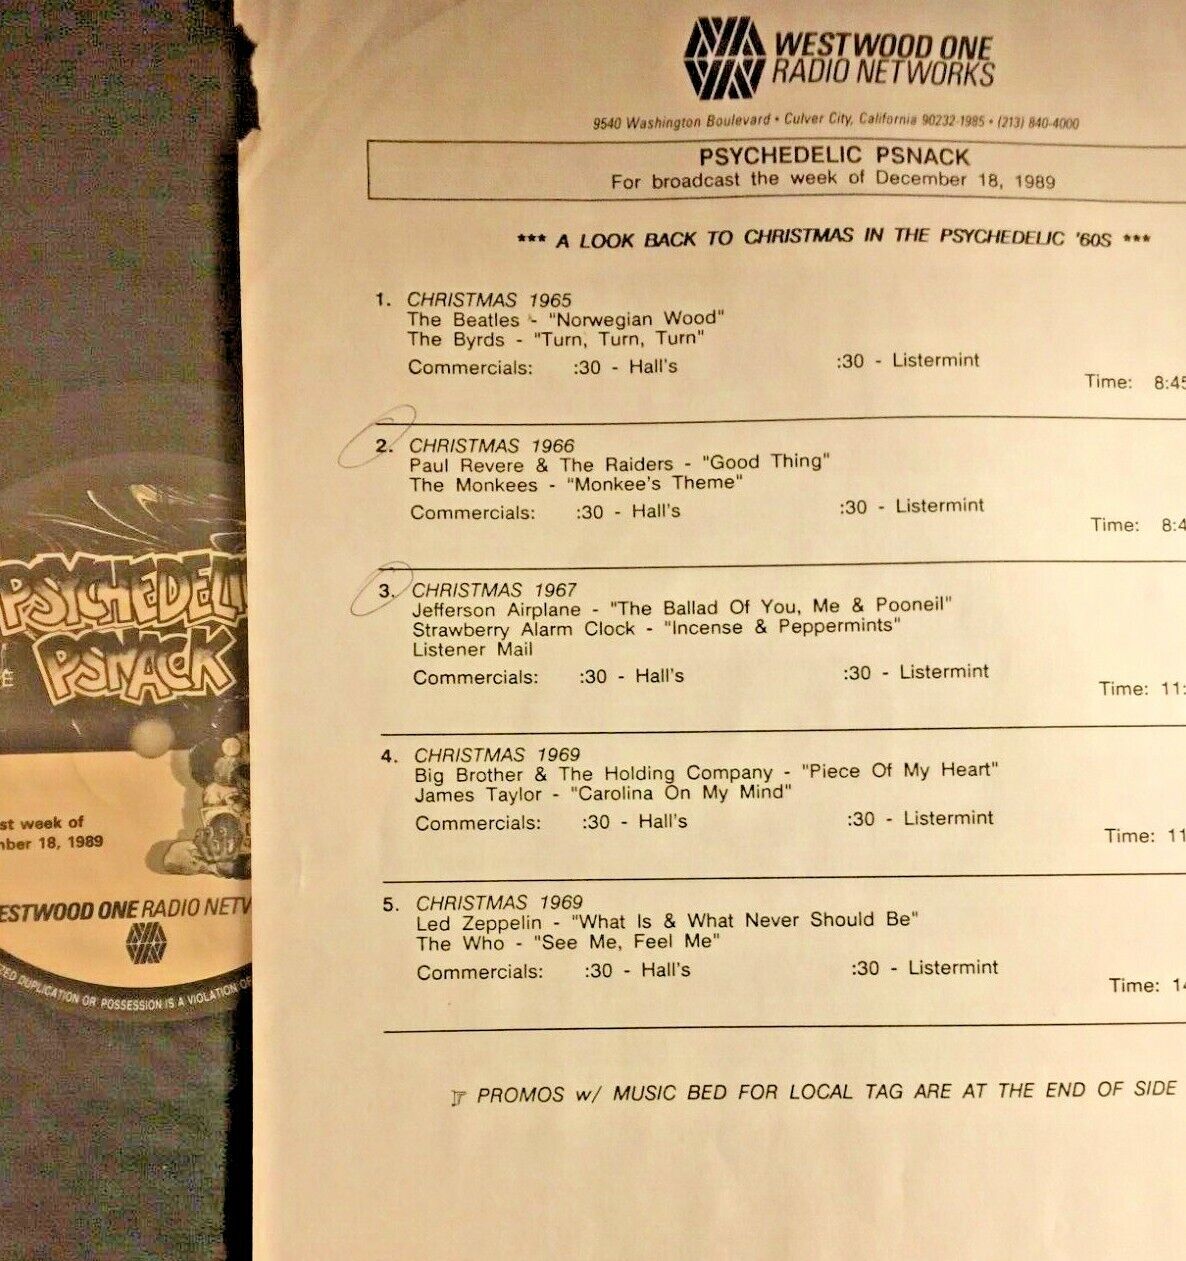 RADIO SHOW12/18/89 CHRISTMAS PSYCHEDELIC PSNACK: PAUL REVERE,BIG BROTHER,BEATLES